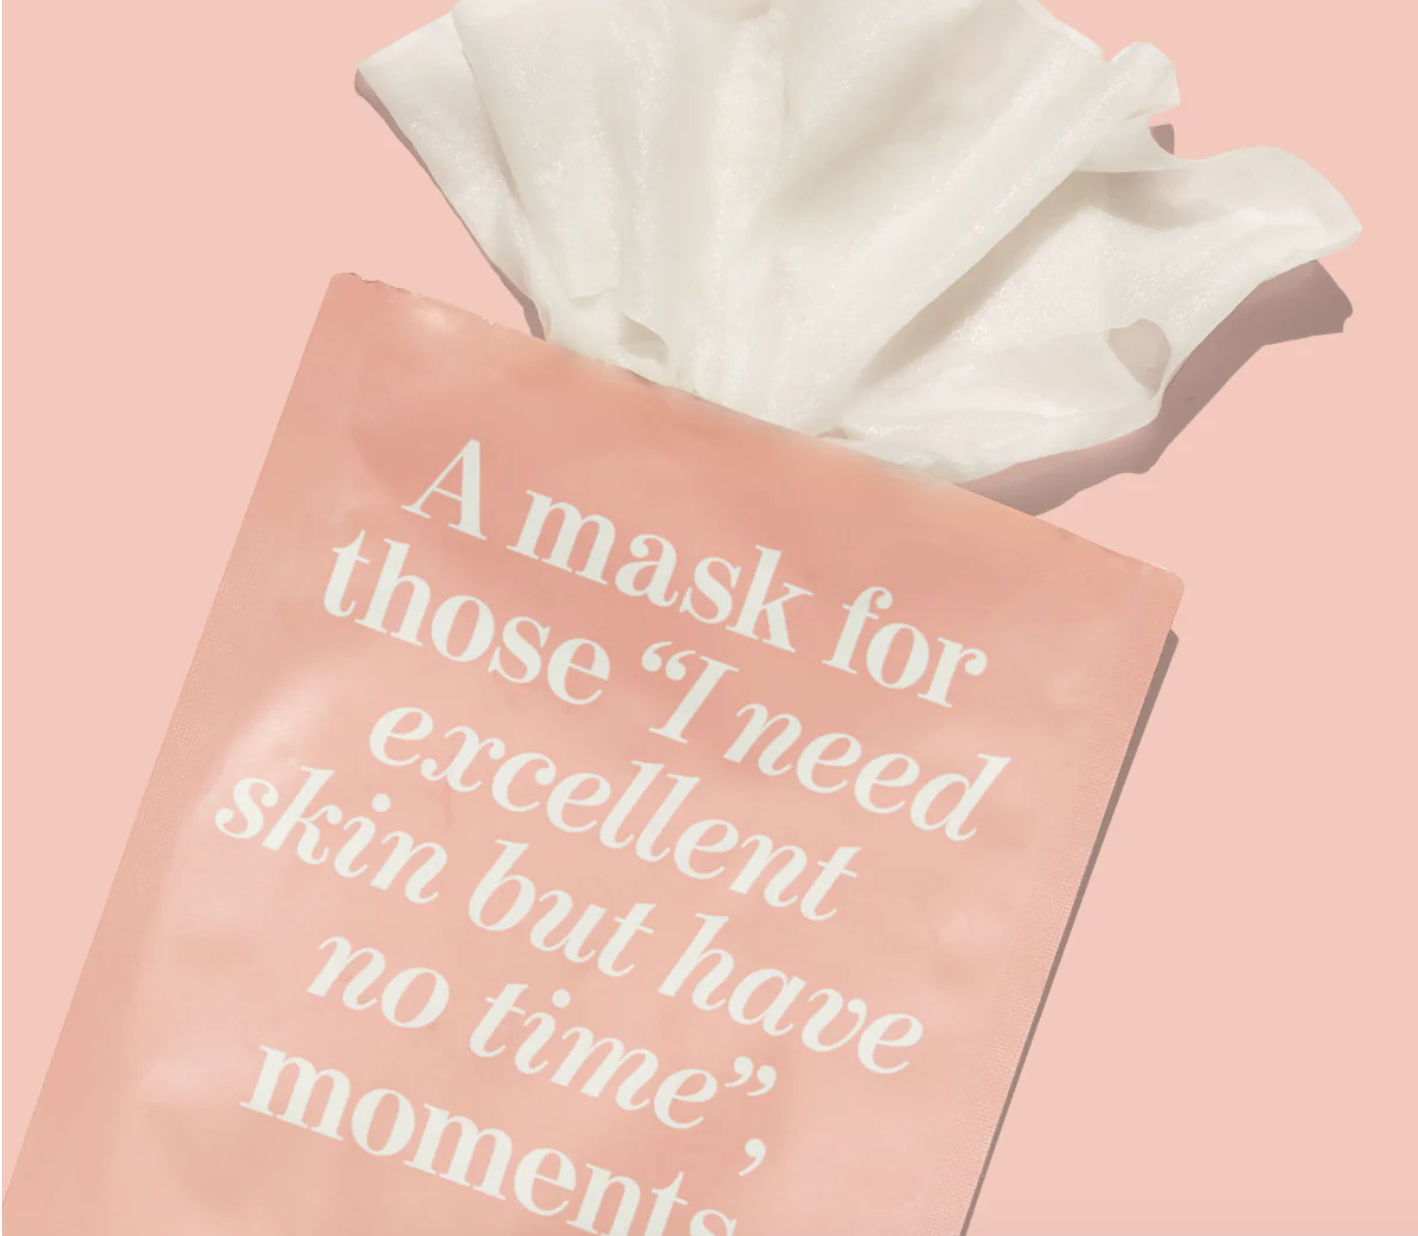 The packaging for Go-To Transformazing Sheet Mask